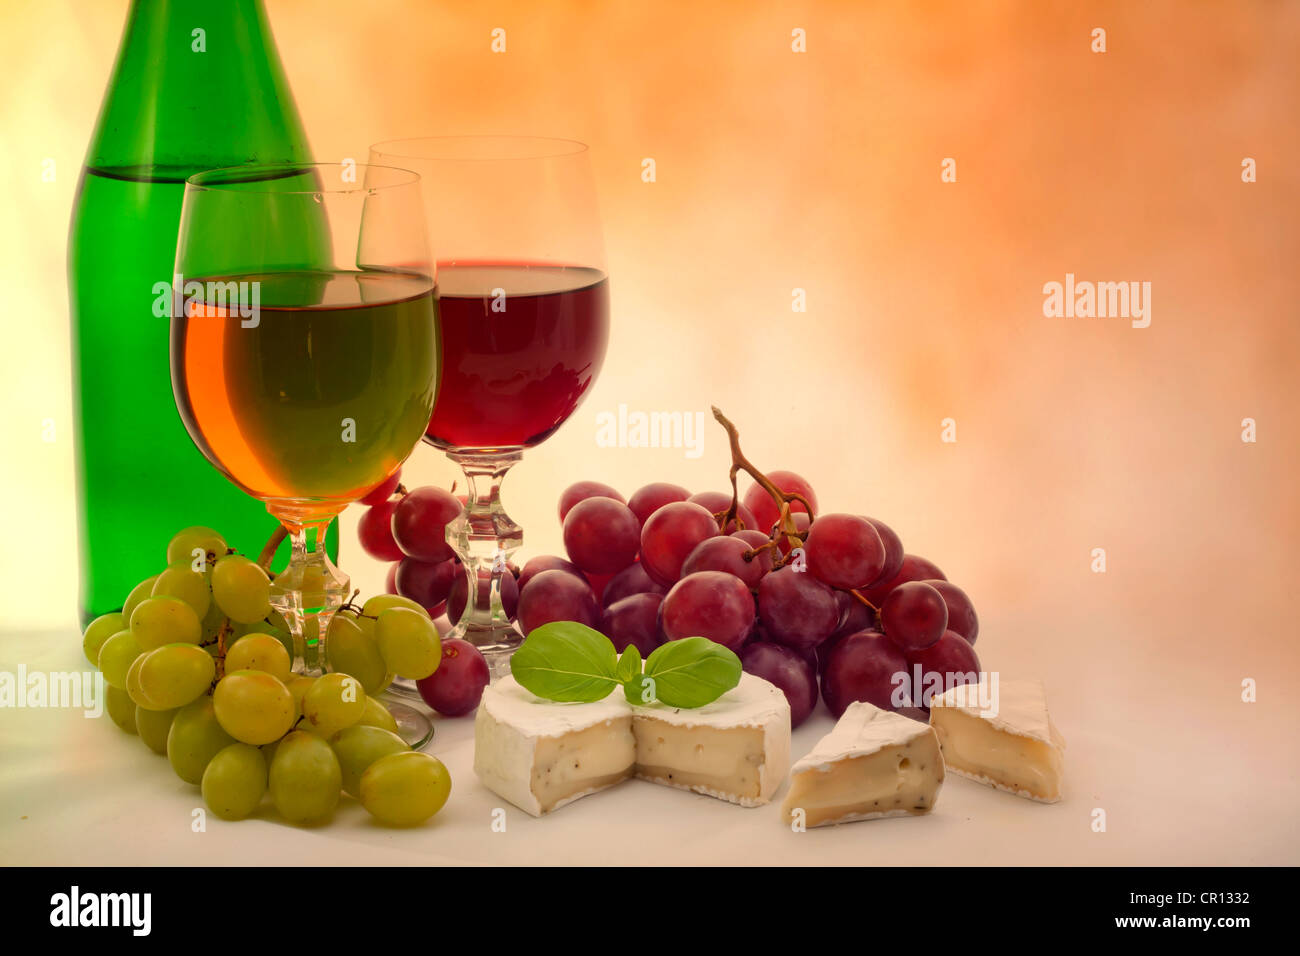 Red, white wine and grapes still life grunge concept background Stock Photo